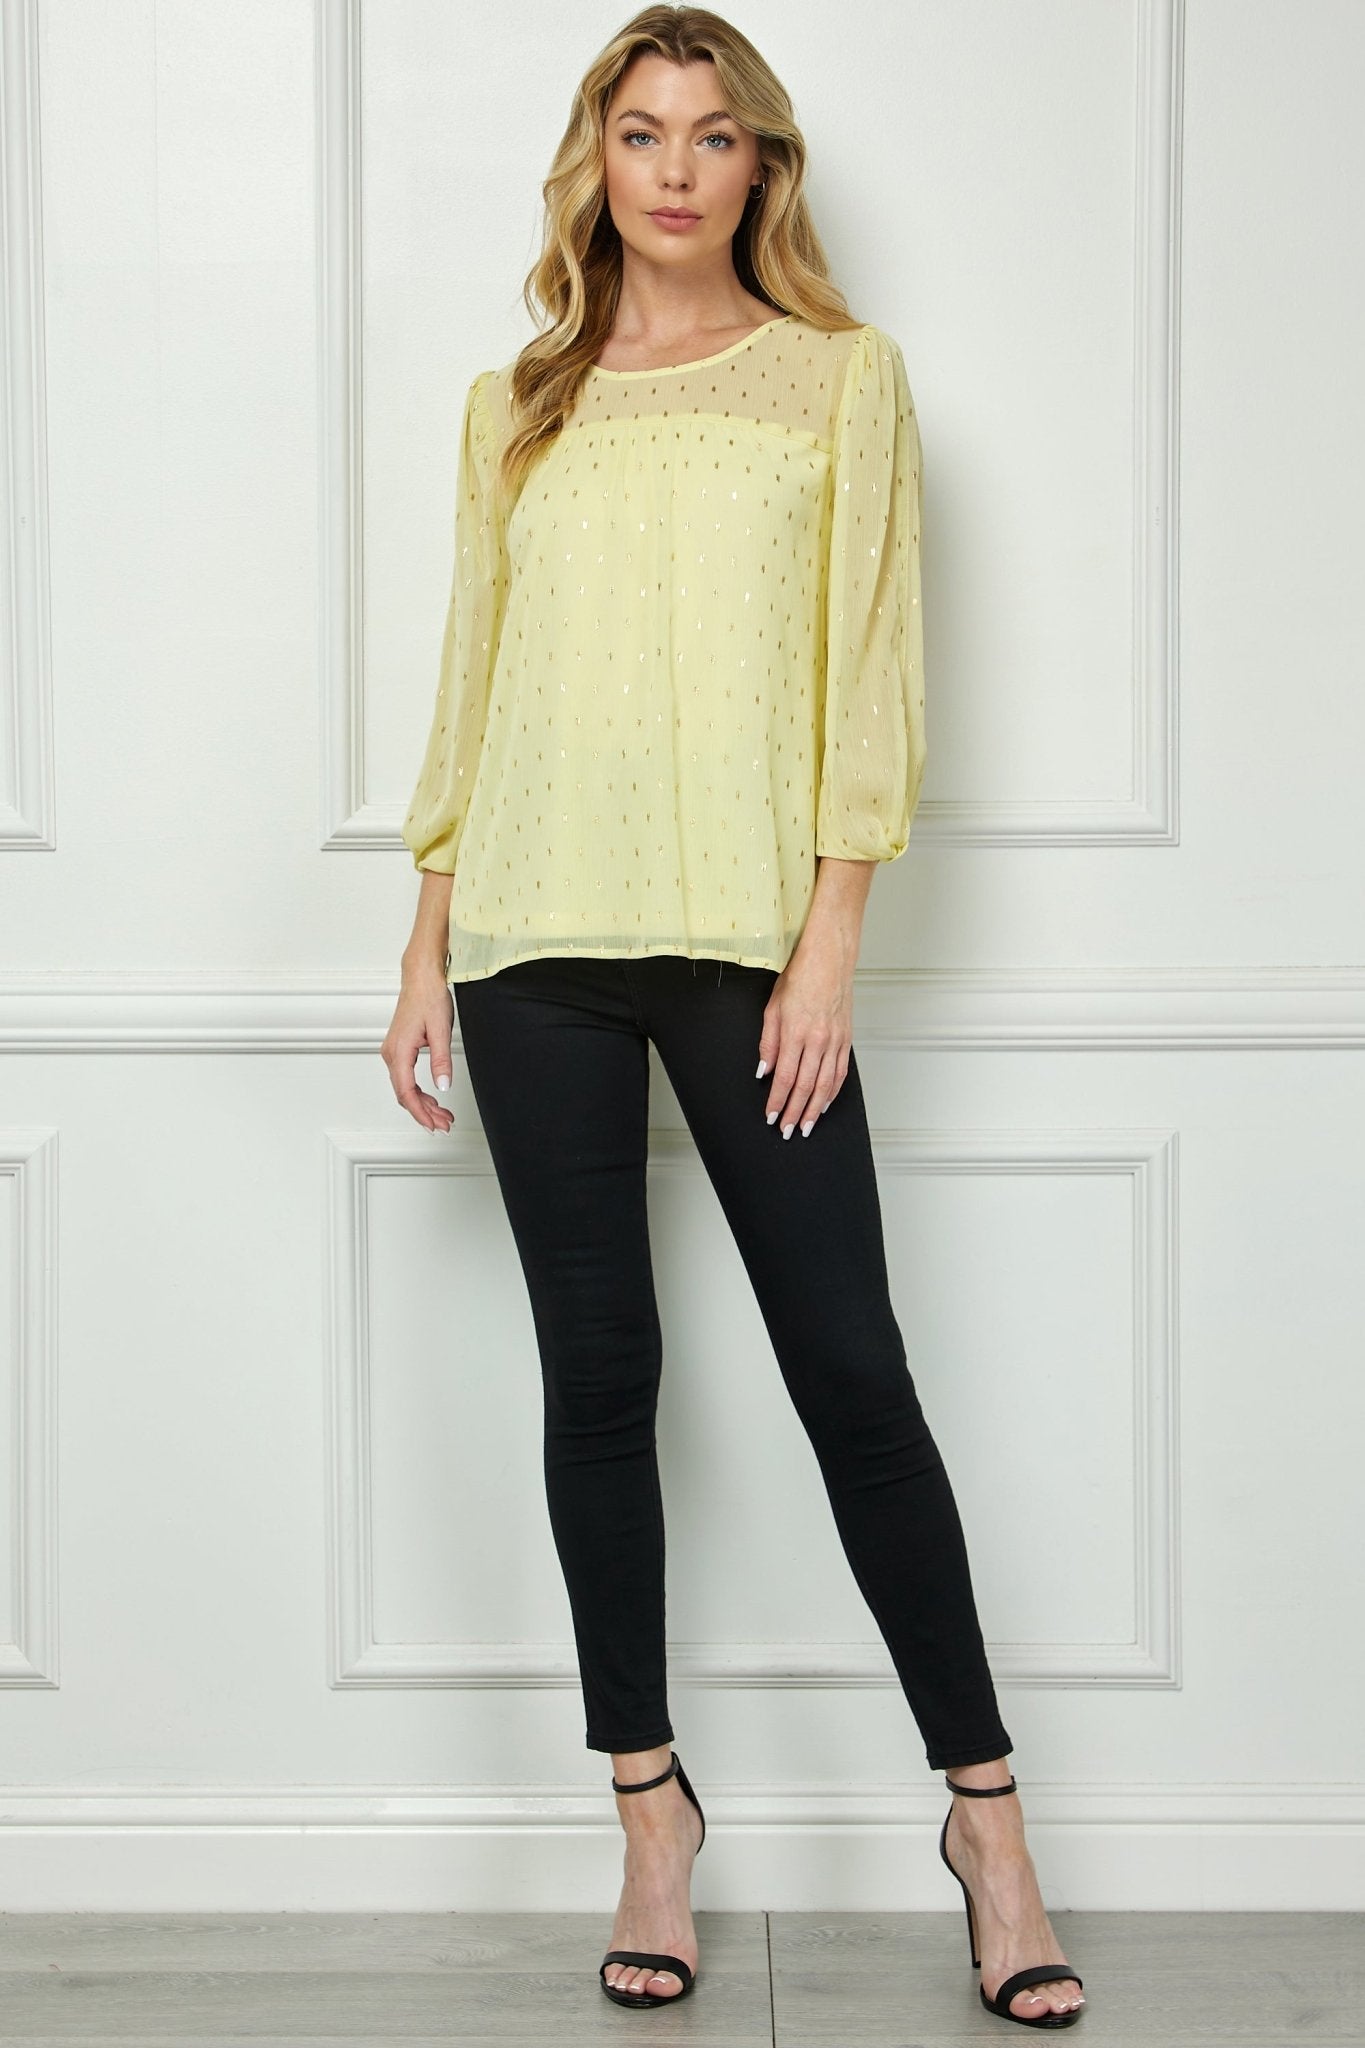 Sara Michelle Chamois & Gold 3/4 Knot Sleeve Scoop Neck Lined Blouse - DressbarnShirts & Blouses